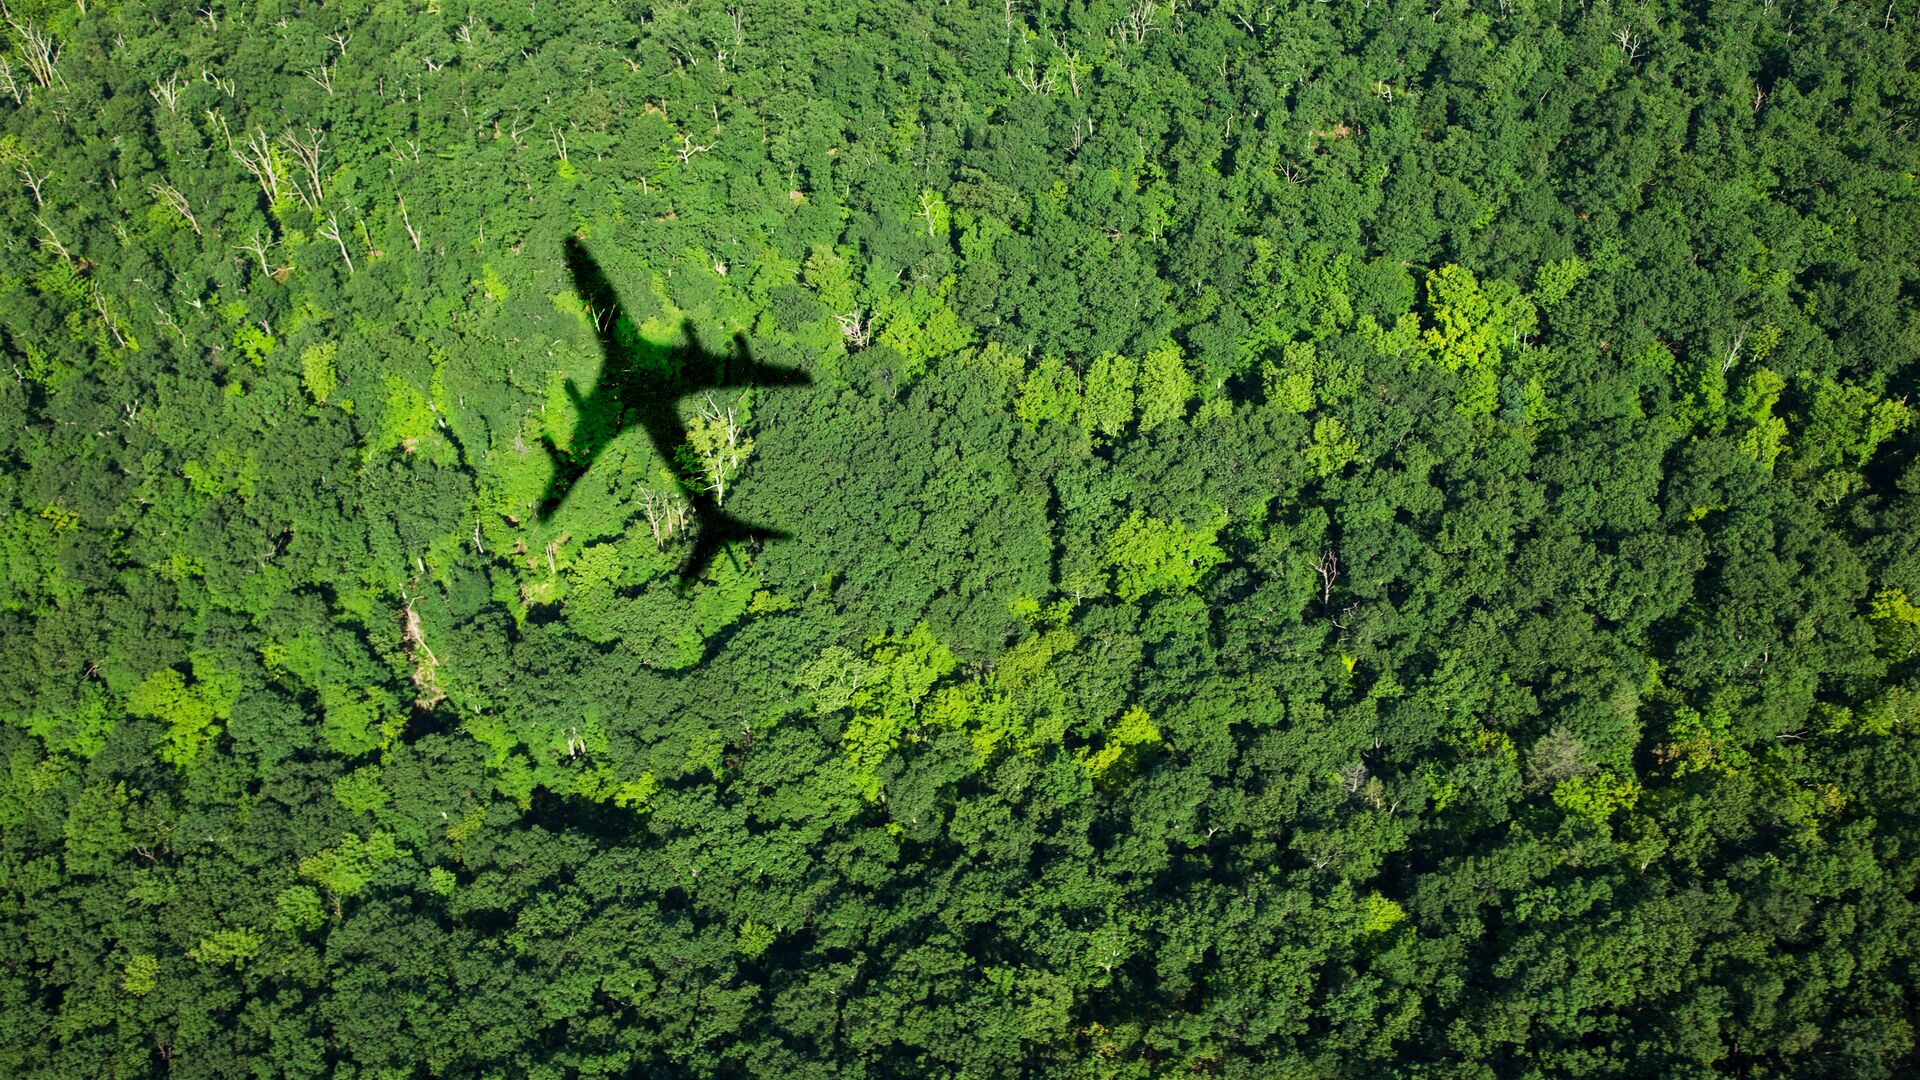 A shadow of an airplane cast upon a dense forest